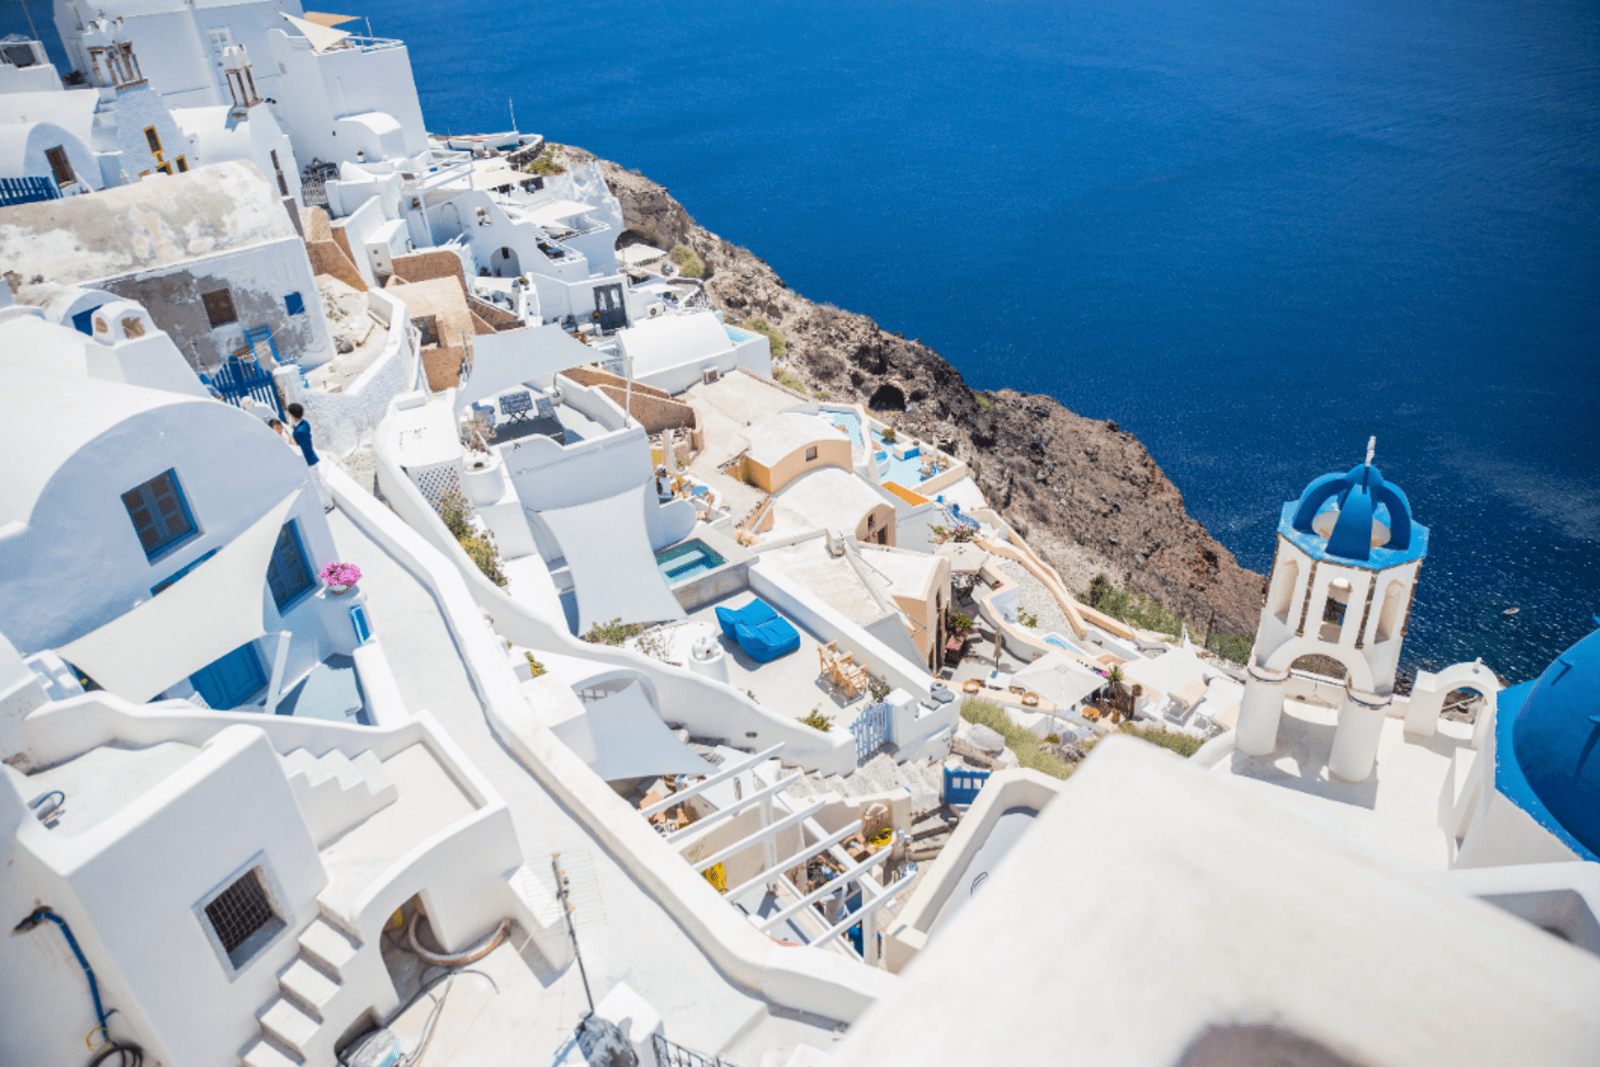 On Intrepid's Greece Sailing Adventure, you can explore the town of Santorini